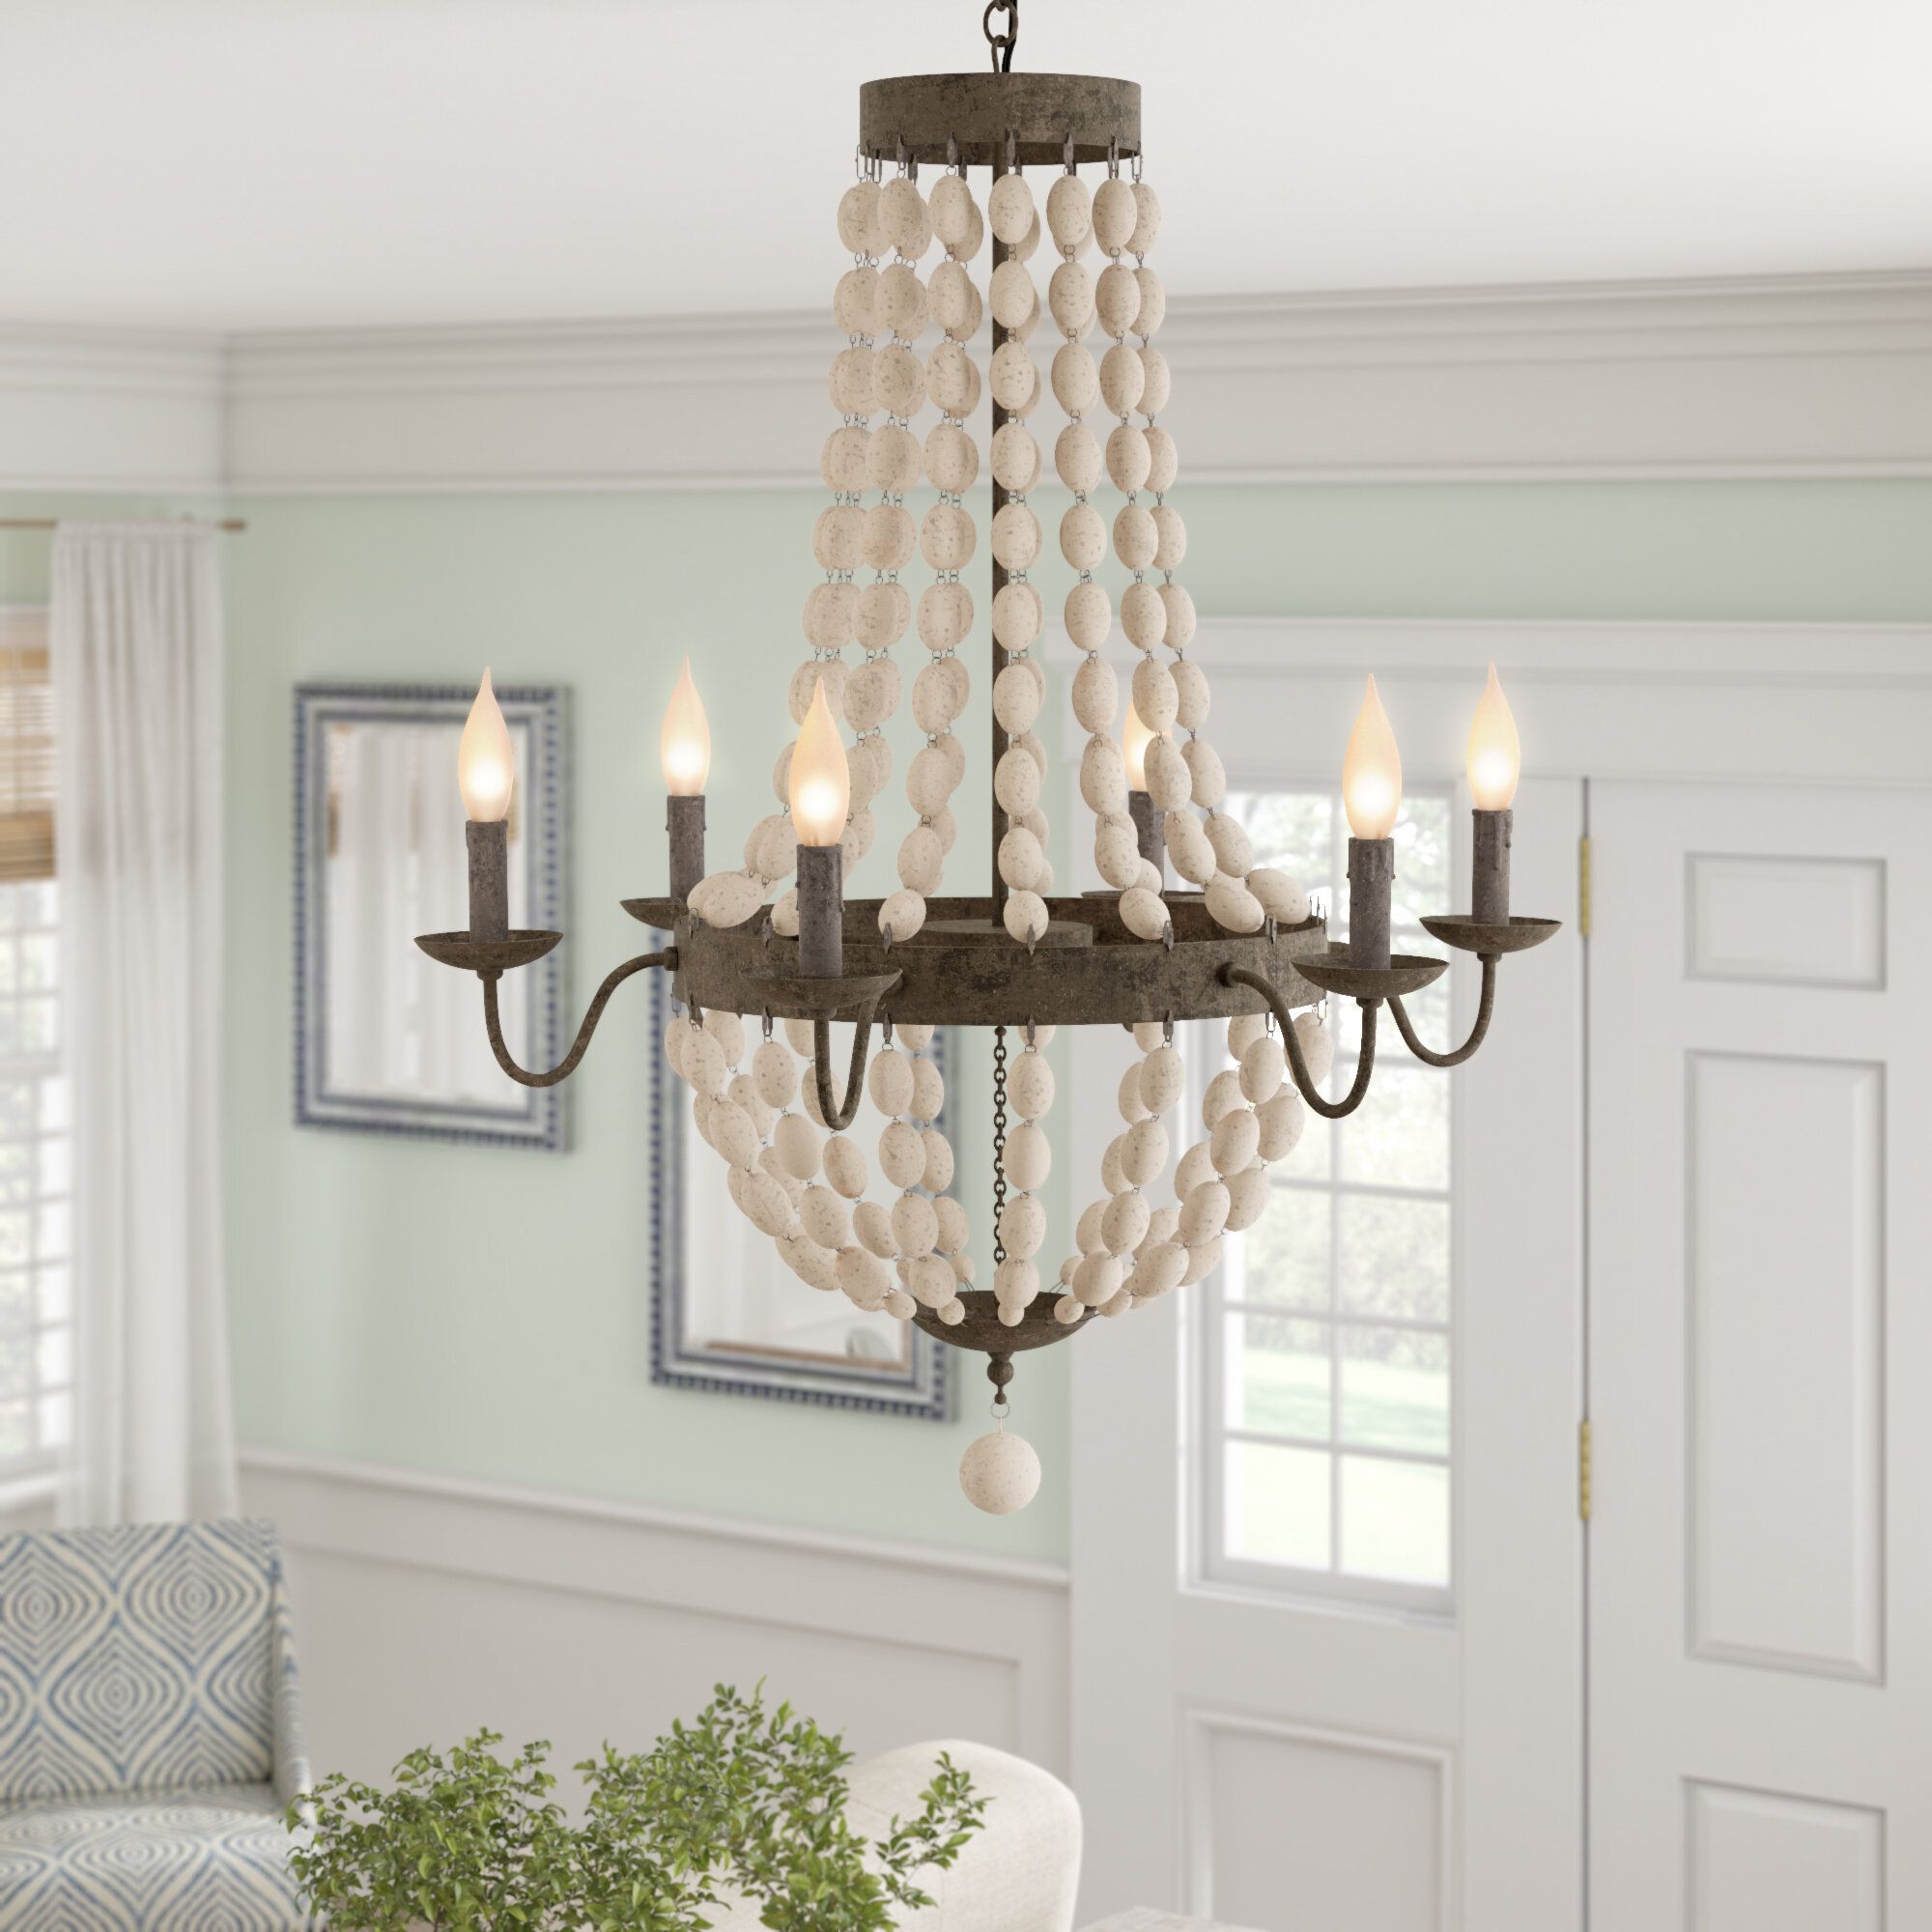 Bargas 6 Light Empire Chandelier Throughout Ladonna 5 Light Novelty Chandeliers (View 14 of 30)